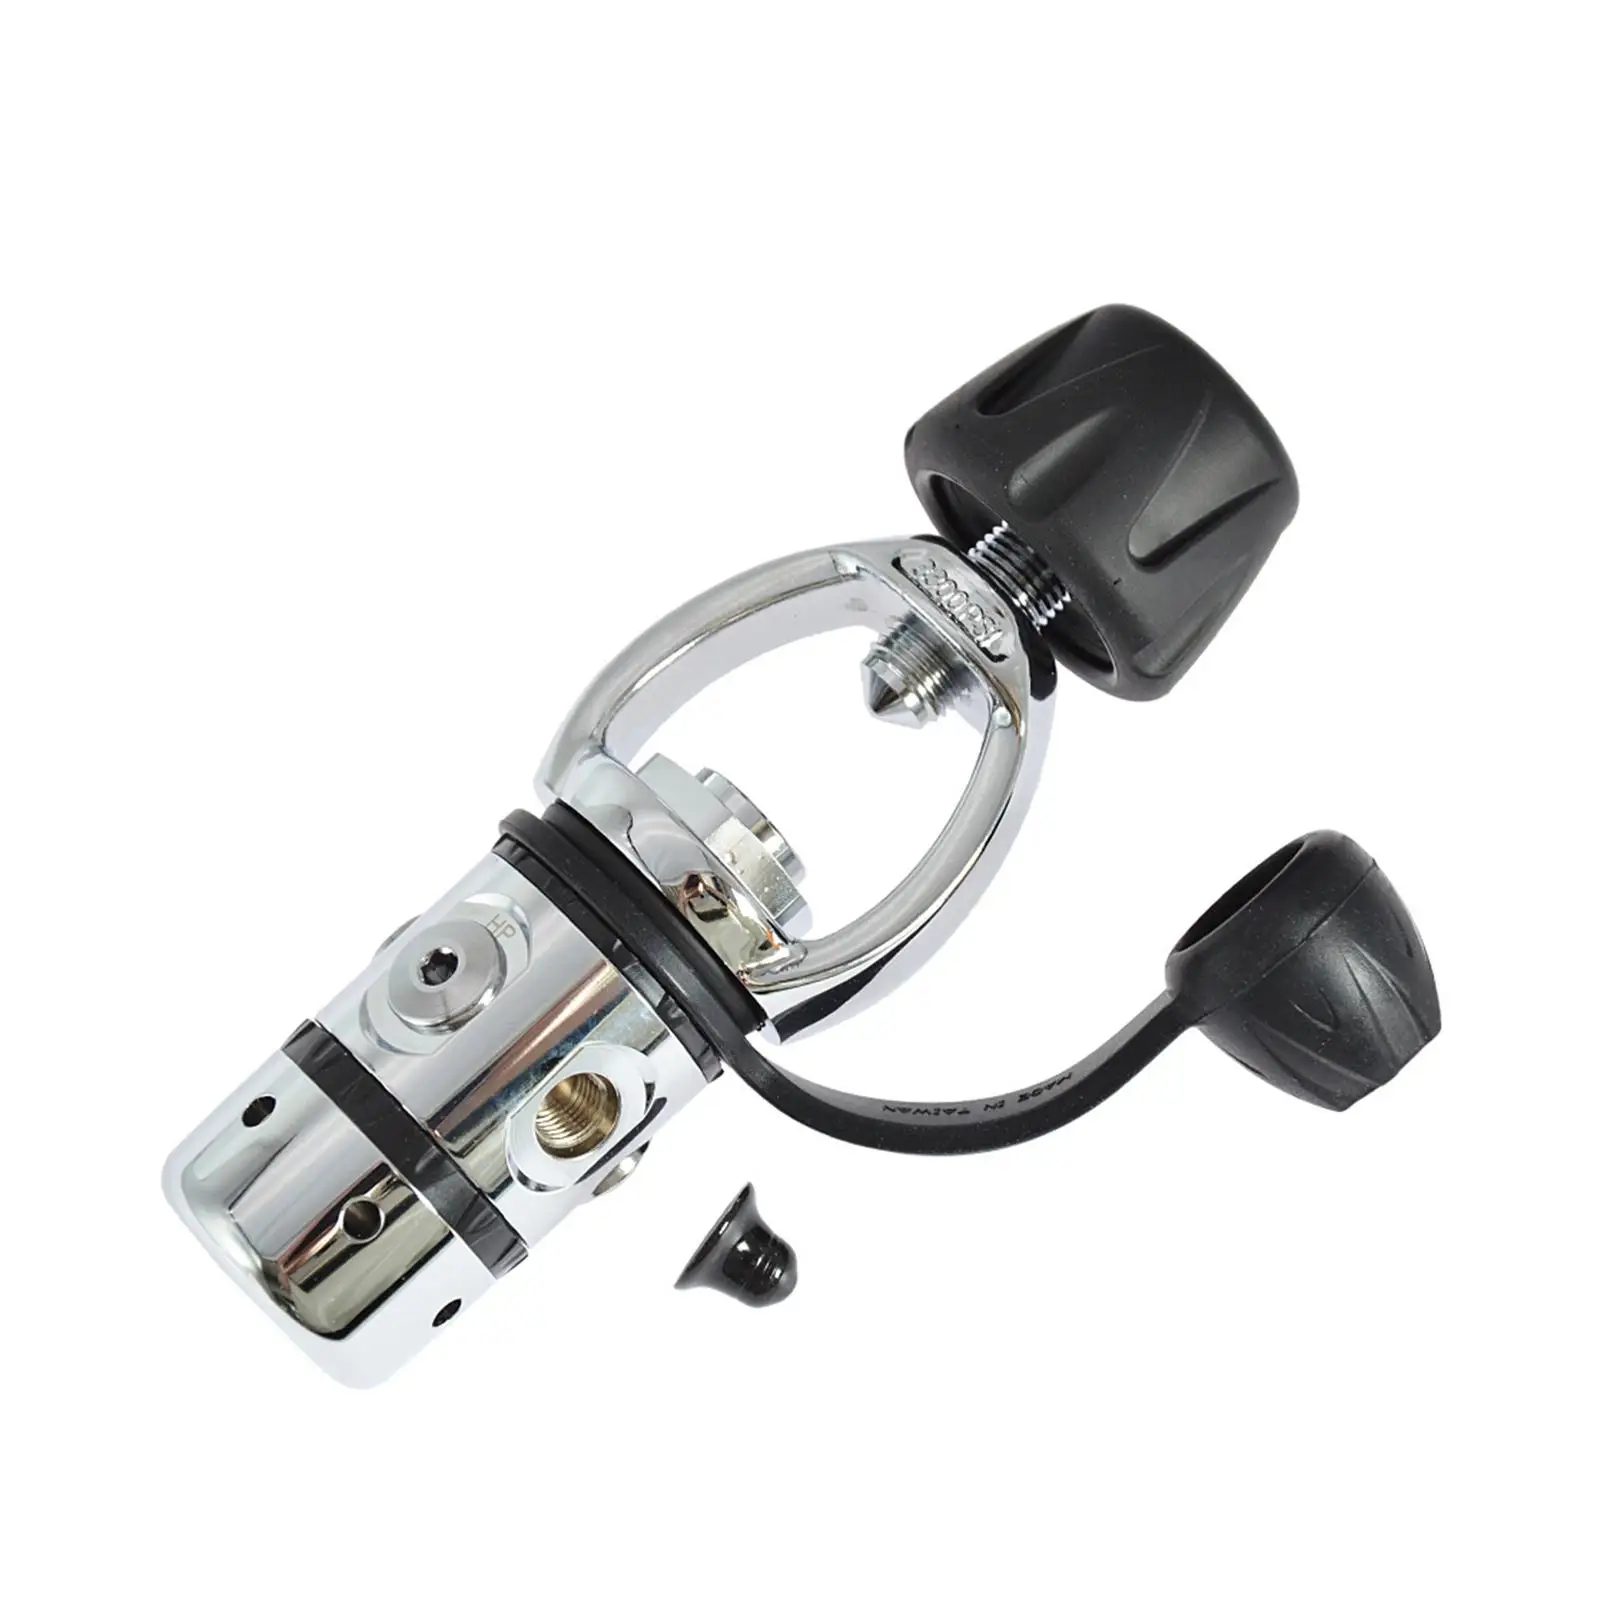 

Piston Diving First Stage Regulator for Scuba Diving Underwater Snorkeling